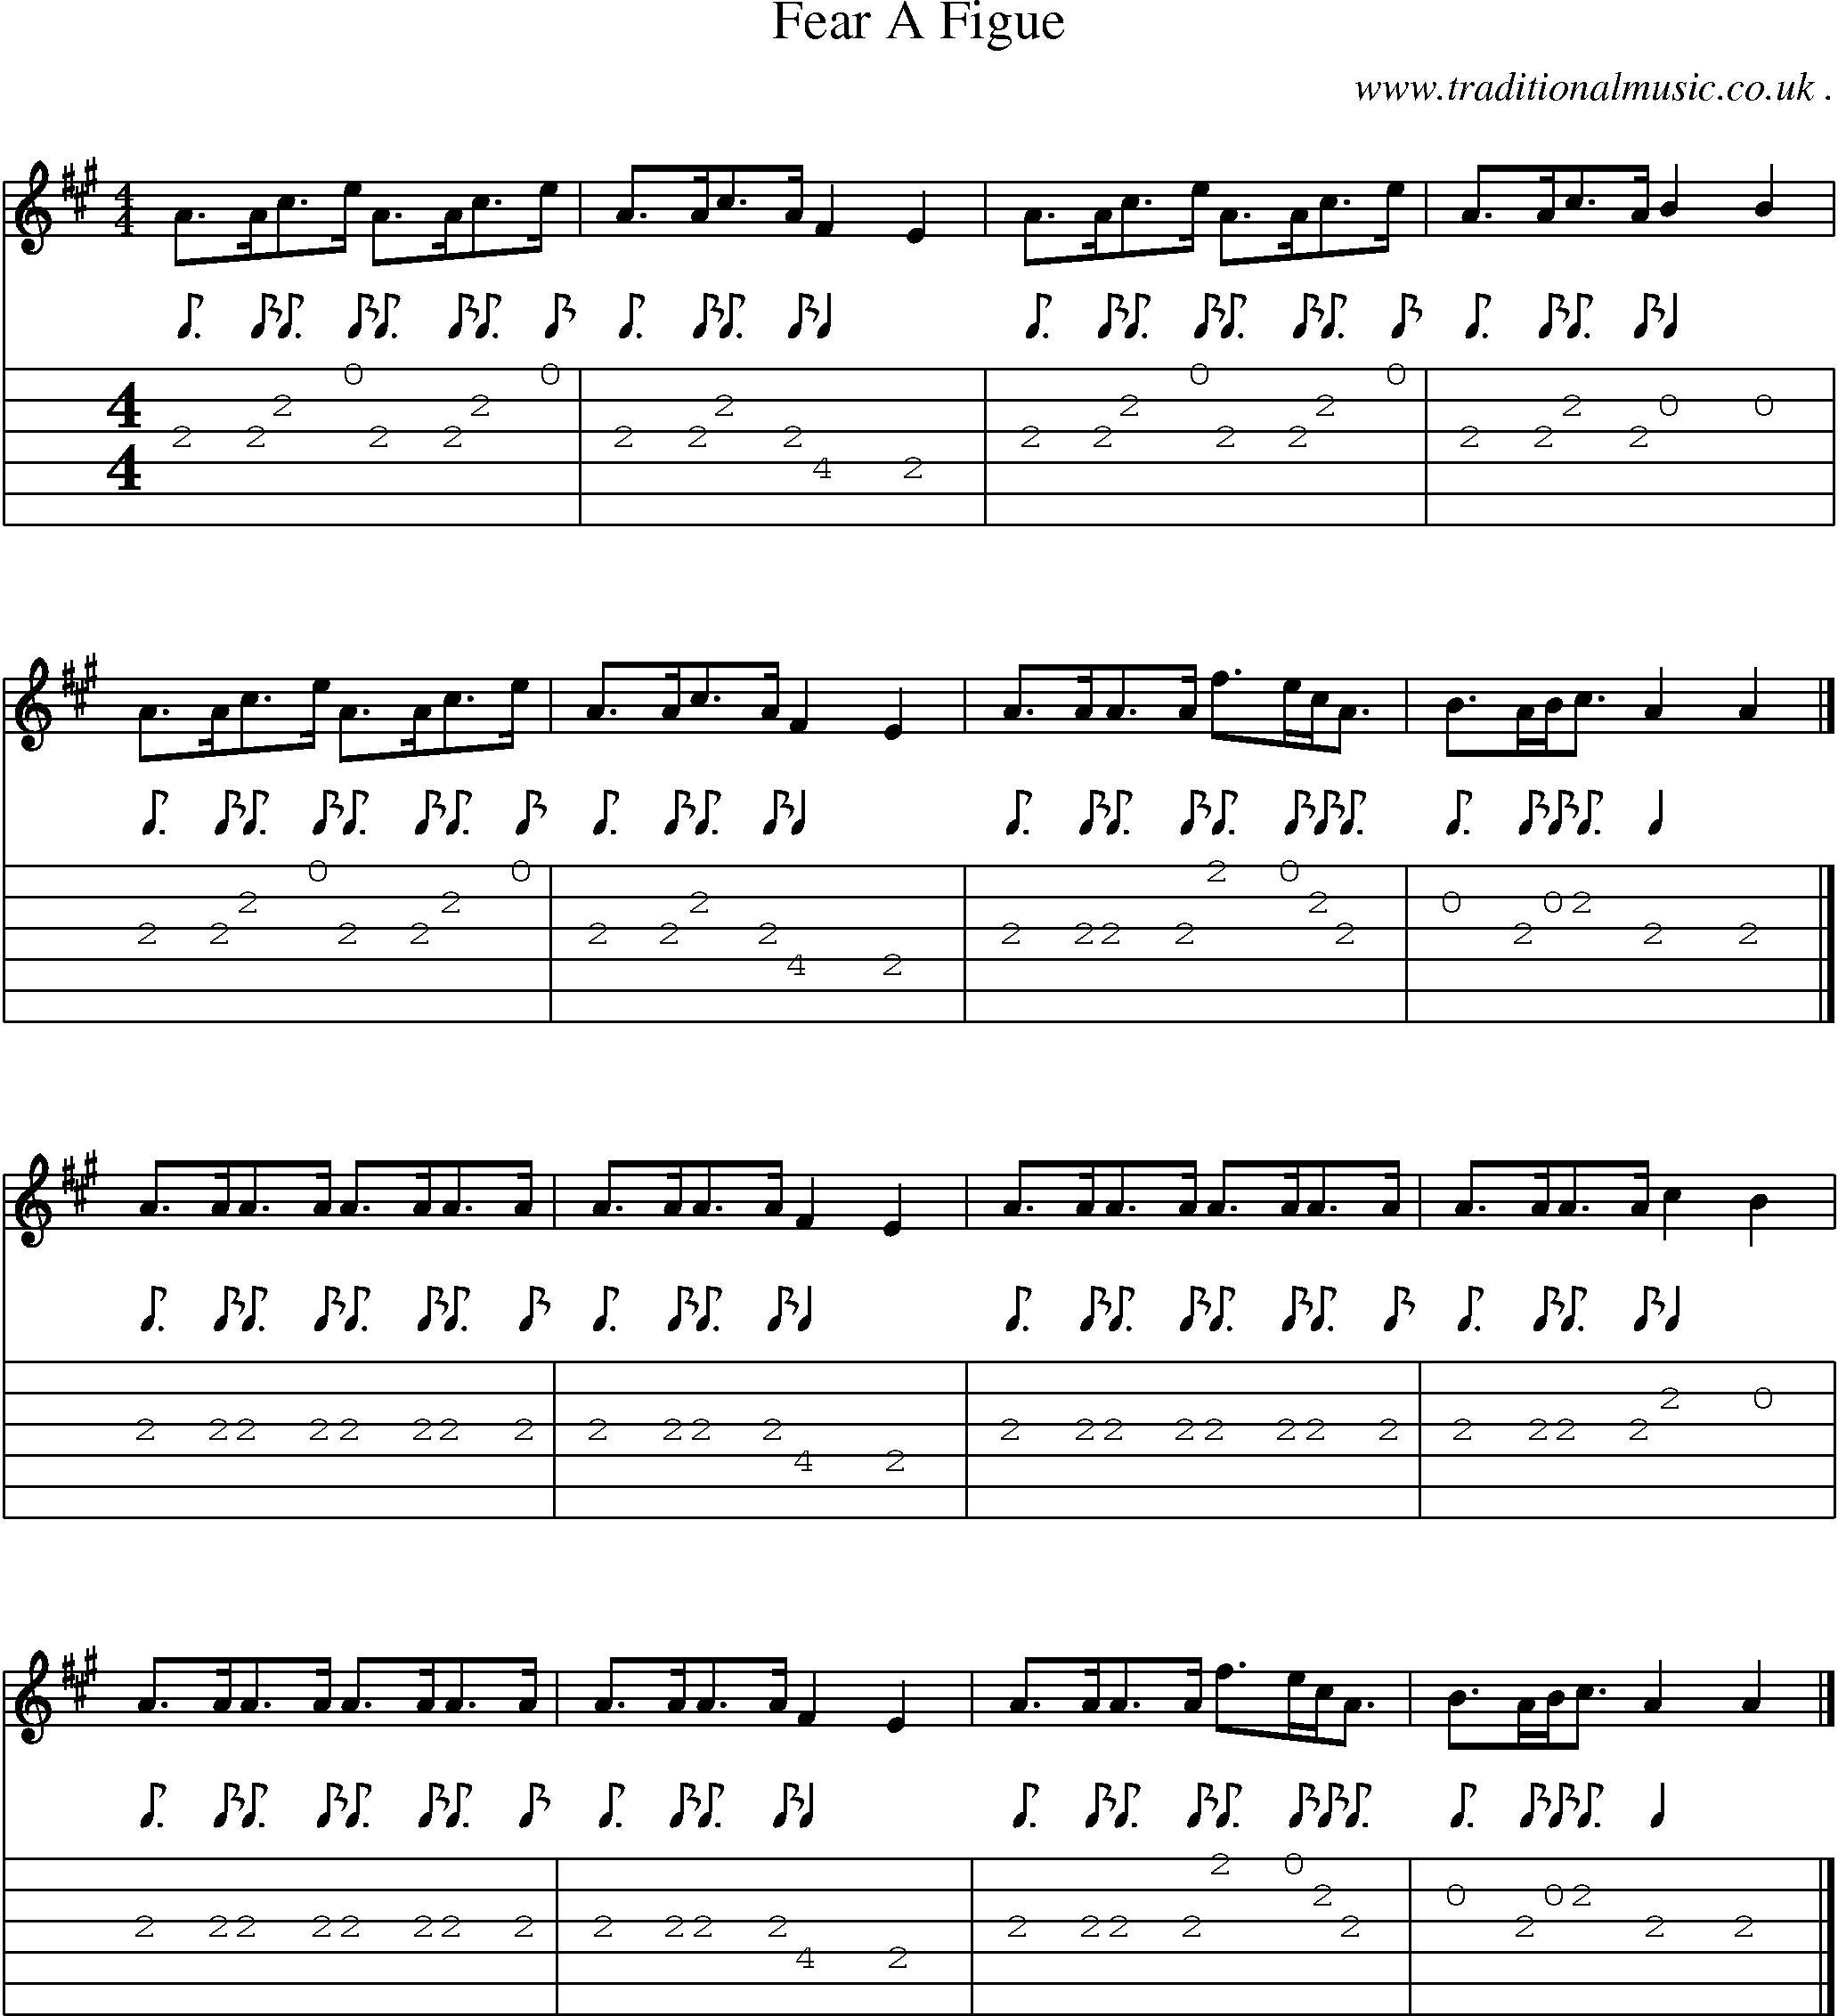 Sheet-music  score, Chords and Guitar Tabs for Fear A Figue